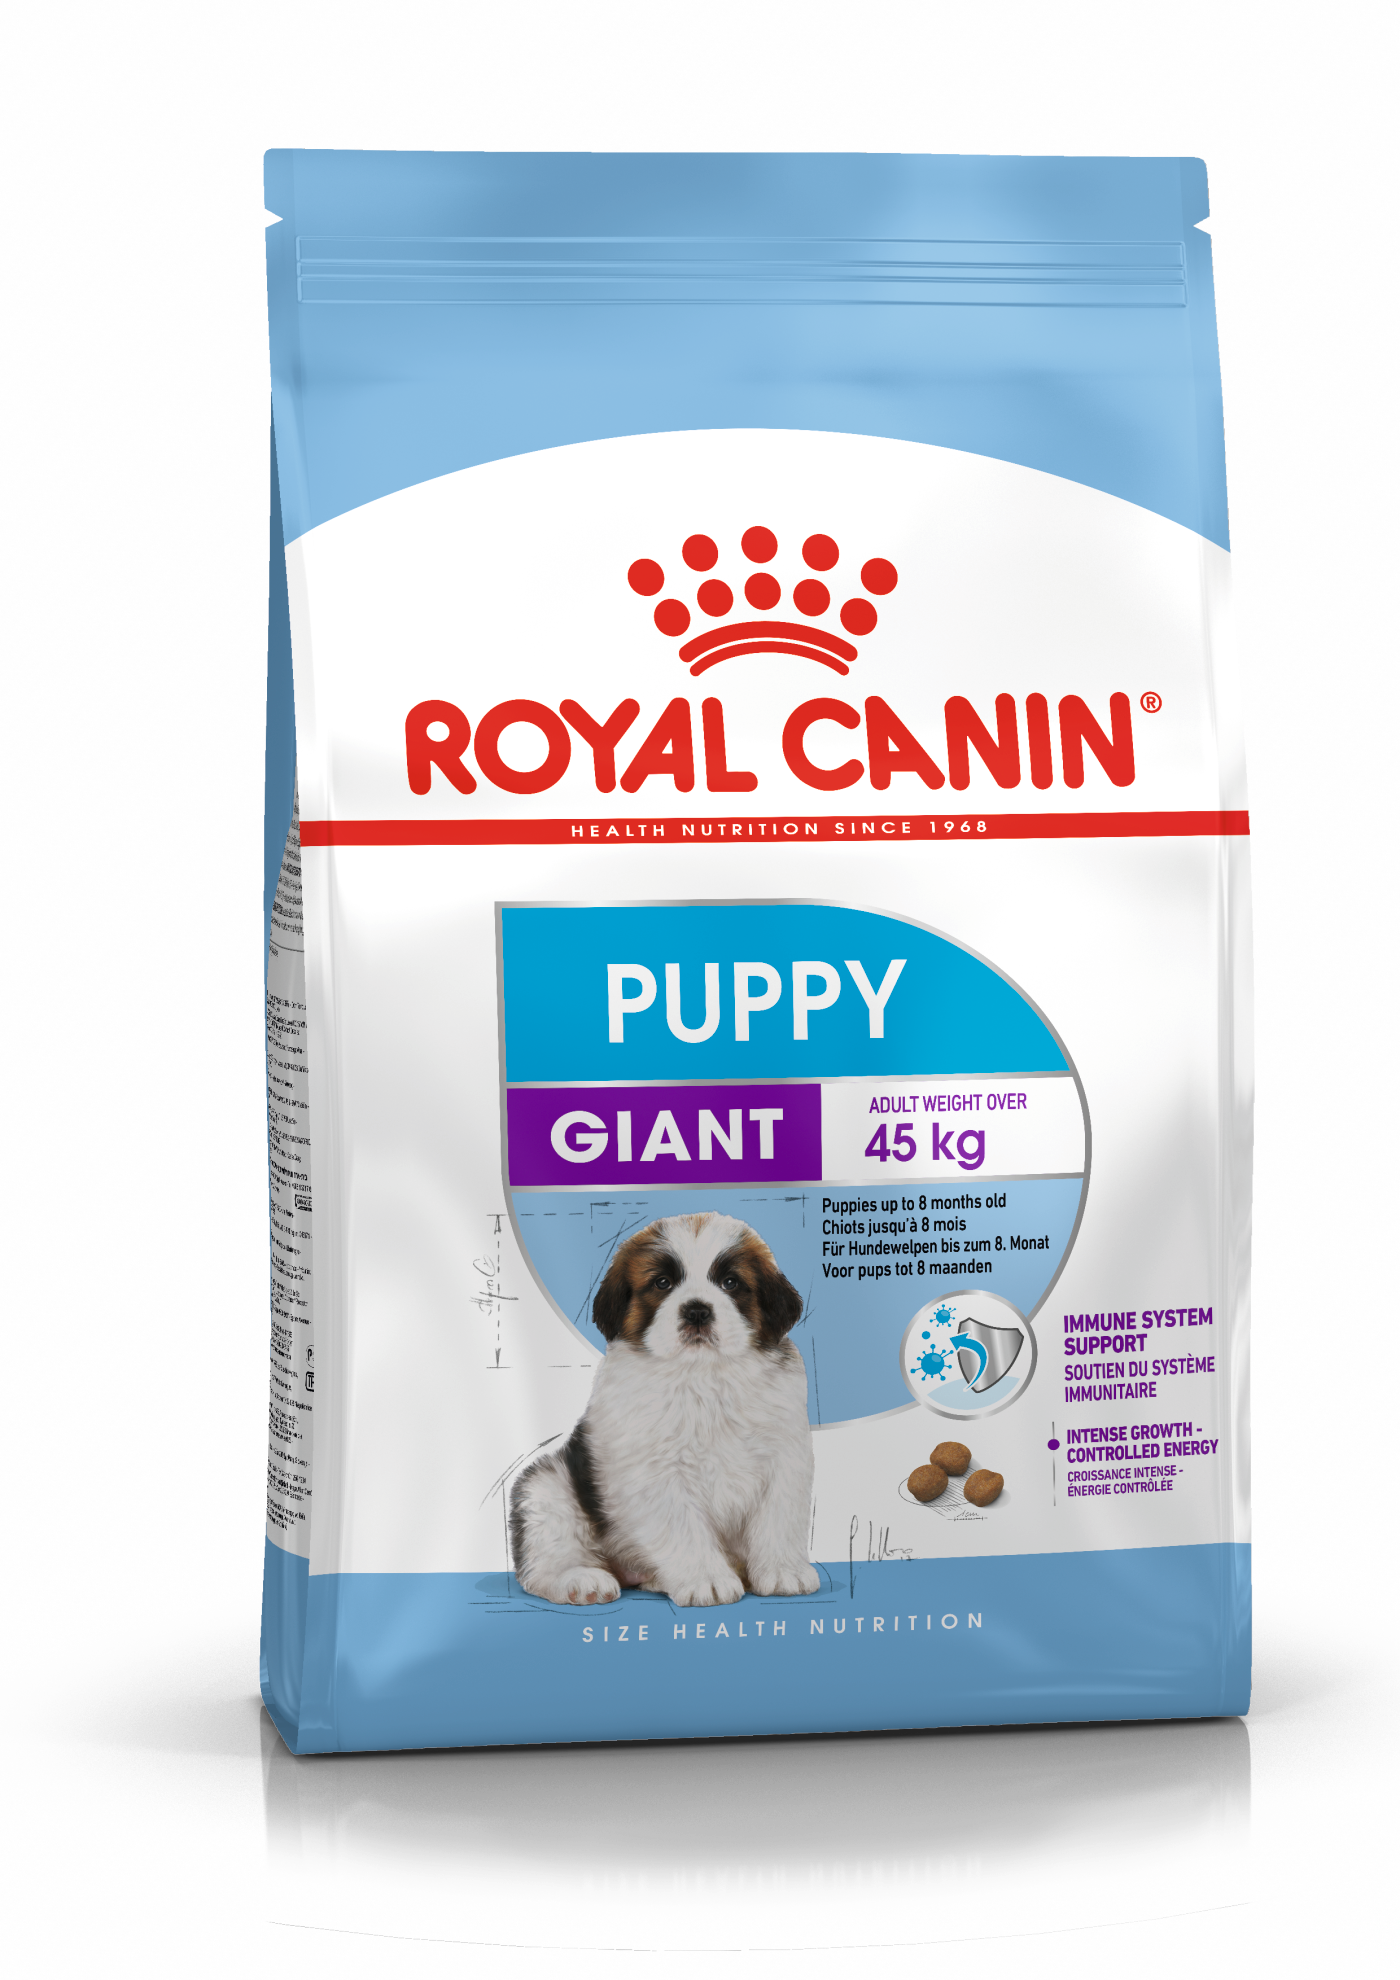 Giant Puppy product image